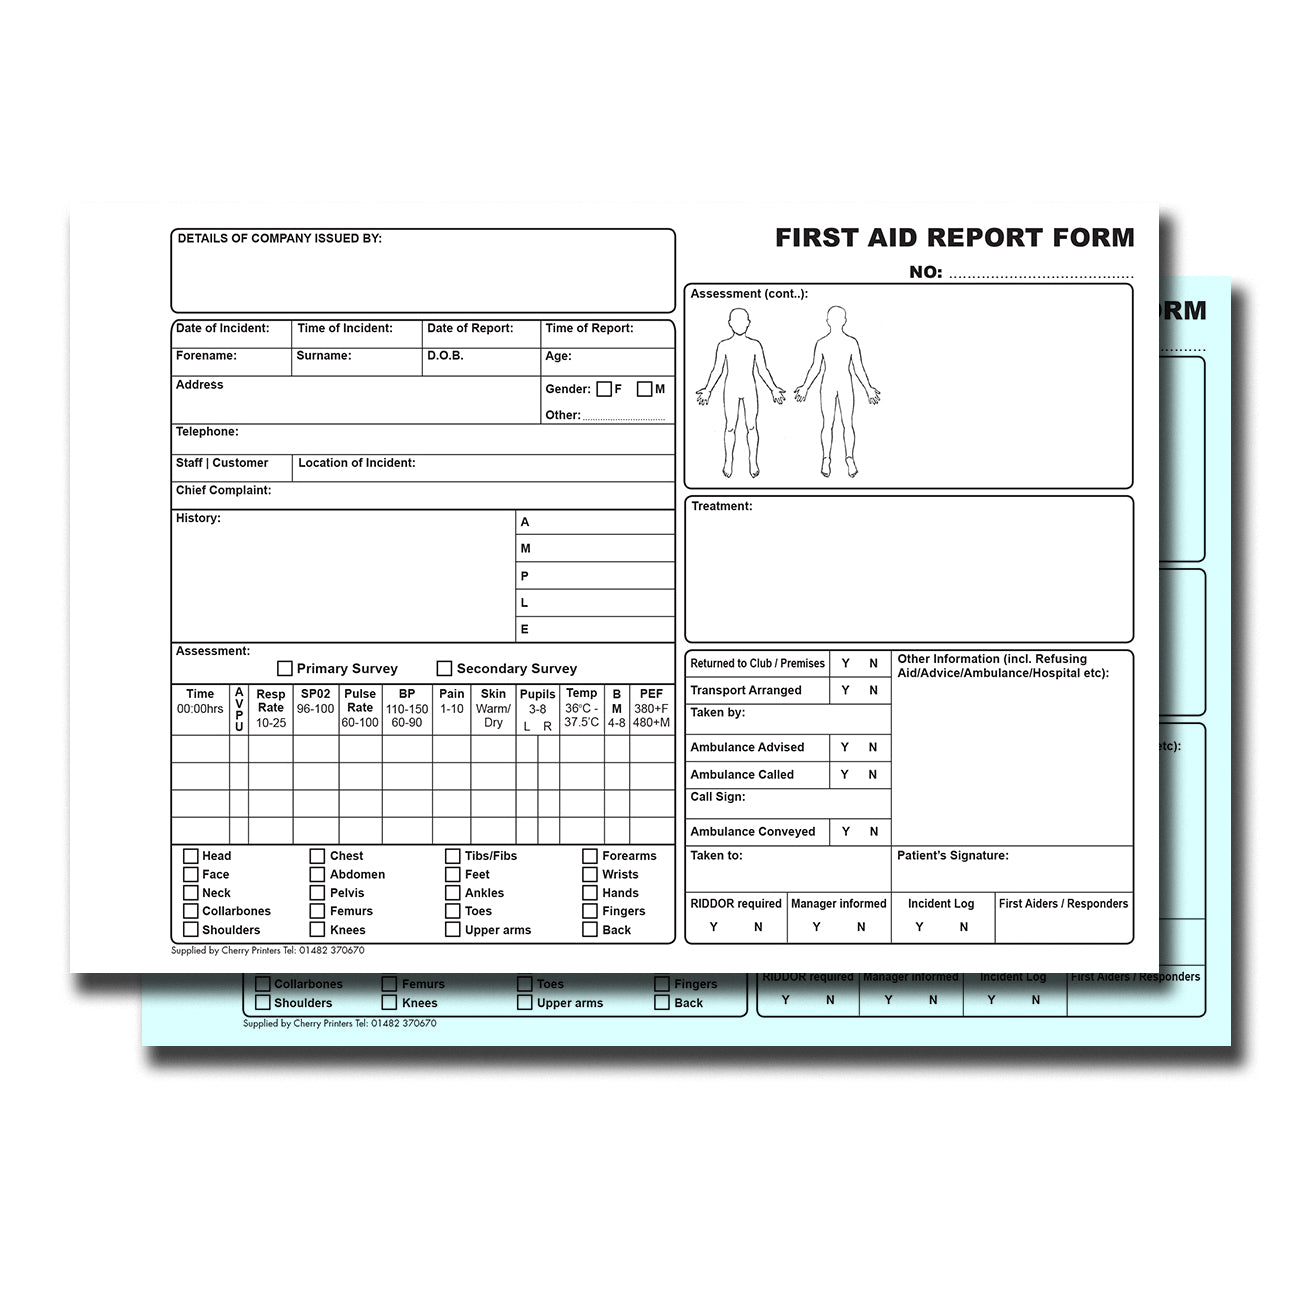 NCR First Aid Report Book A4 Duplicate